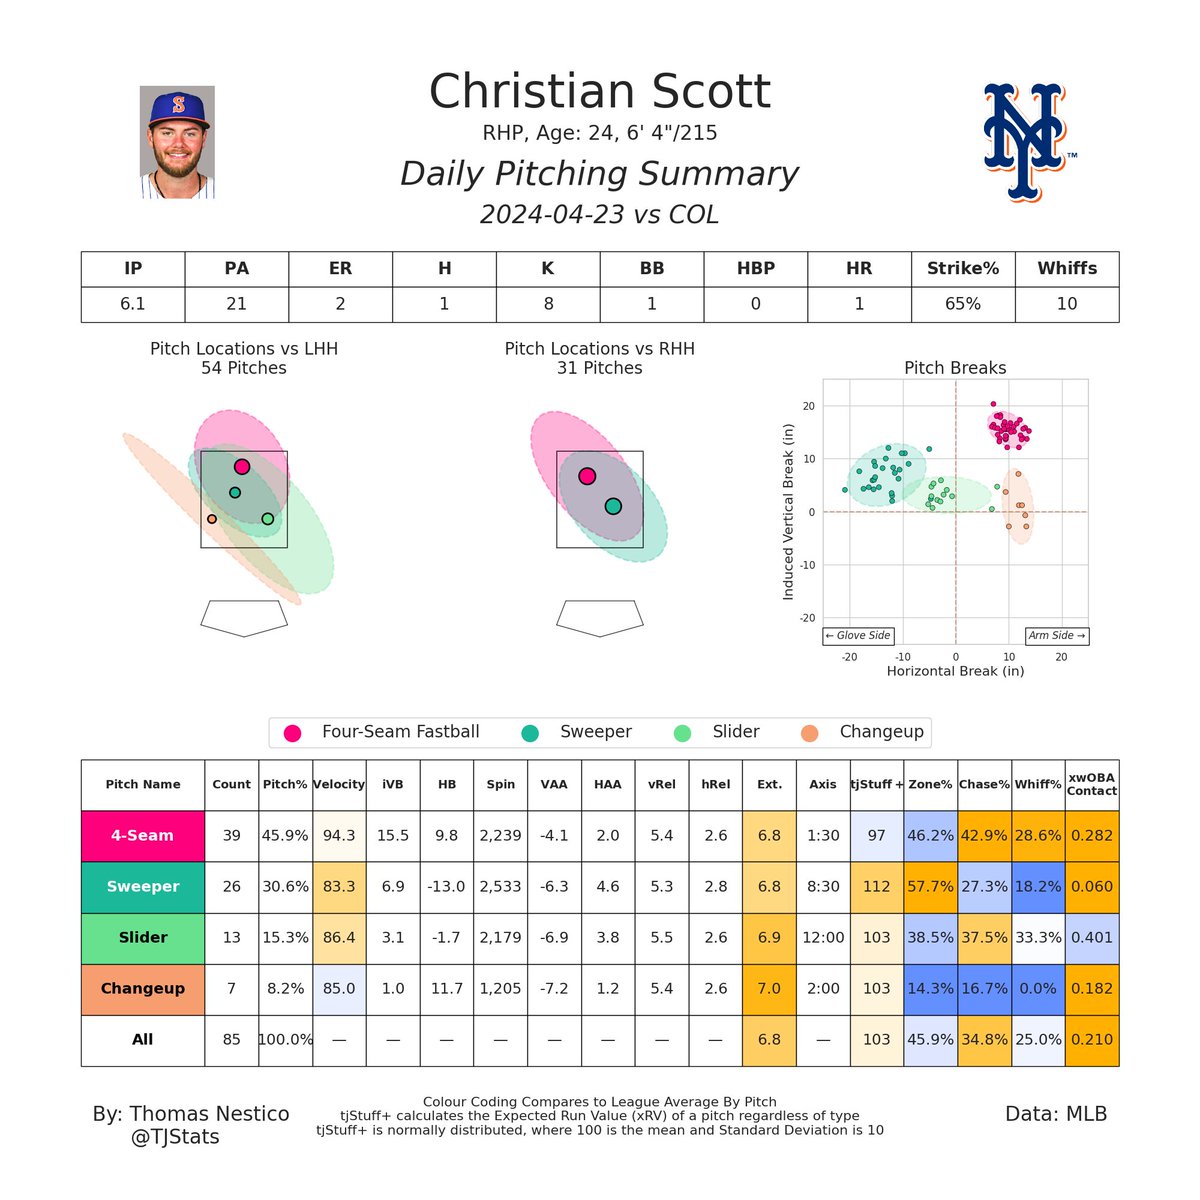 Christian Scott continues his fantastic start in AAA with a 6.1 IP with 2 ER, 1 H, 1 BB, and 8 K

Scott's execution of his arsenal is great as he commands all his pitches well

The only damage was on a 2-Run HR, which has been a reoccurring theme this season with 6 HR in 20.2 IP